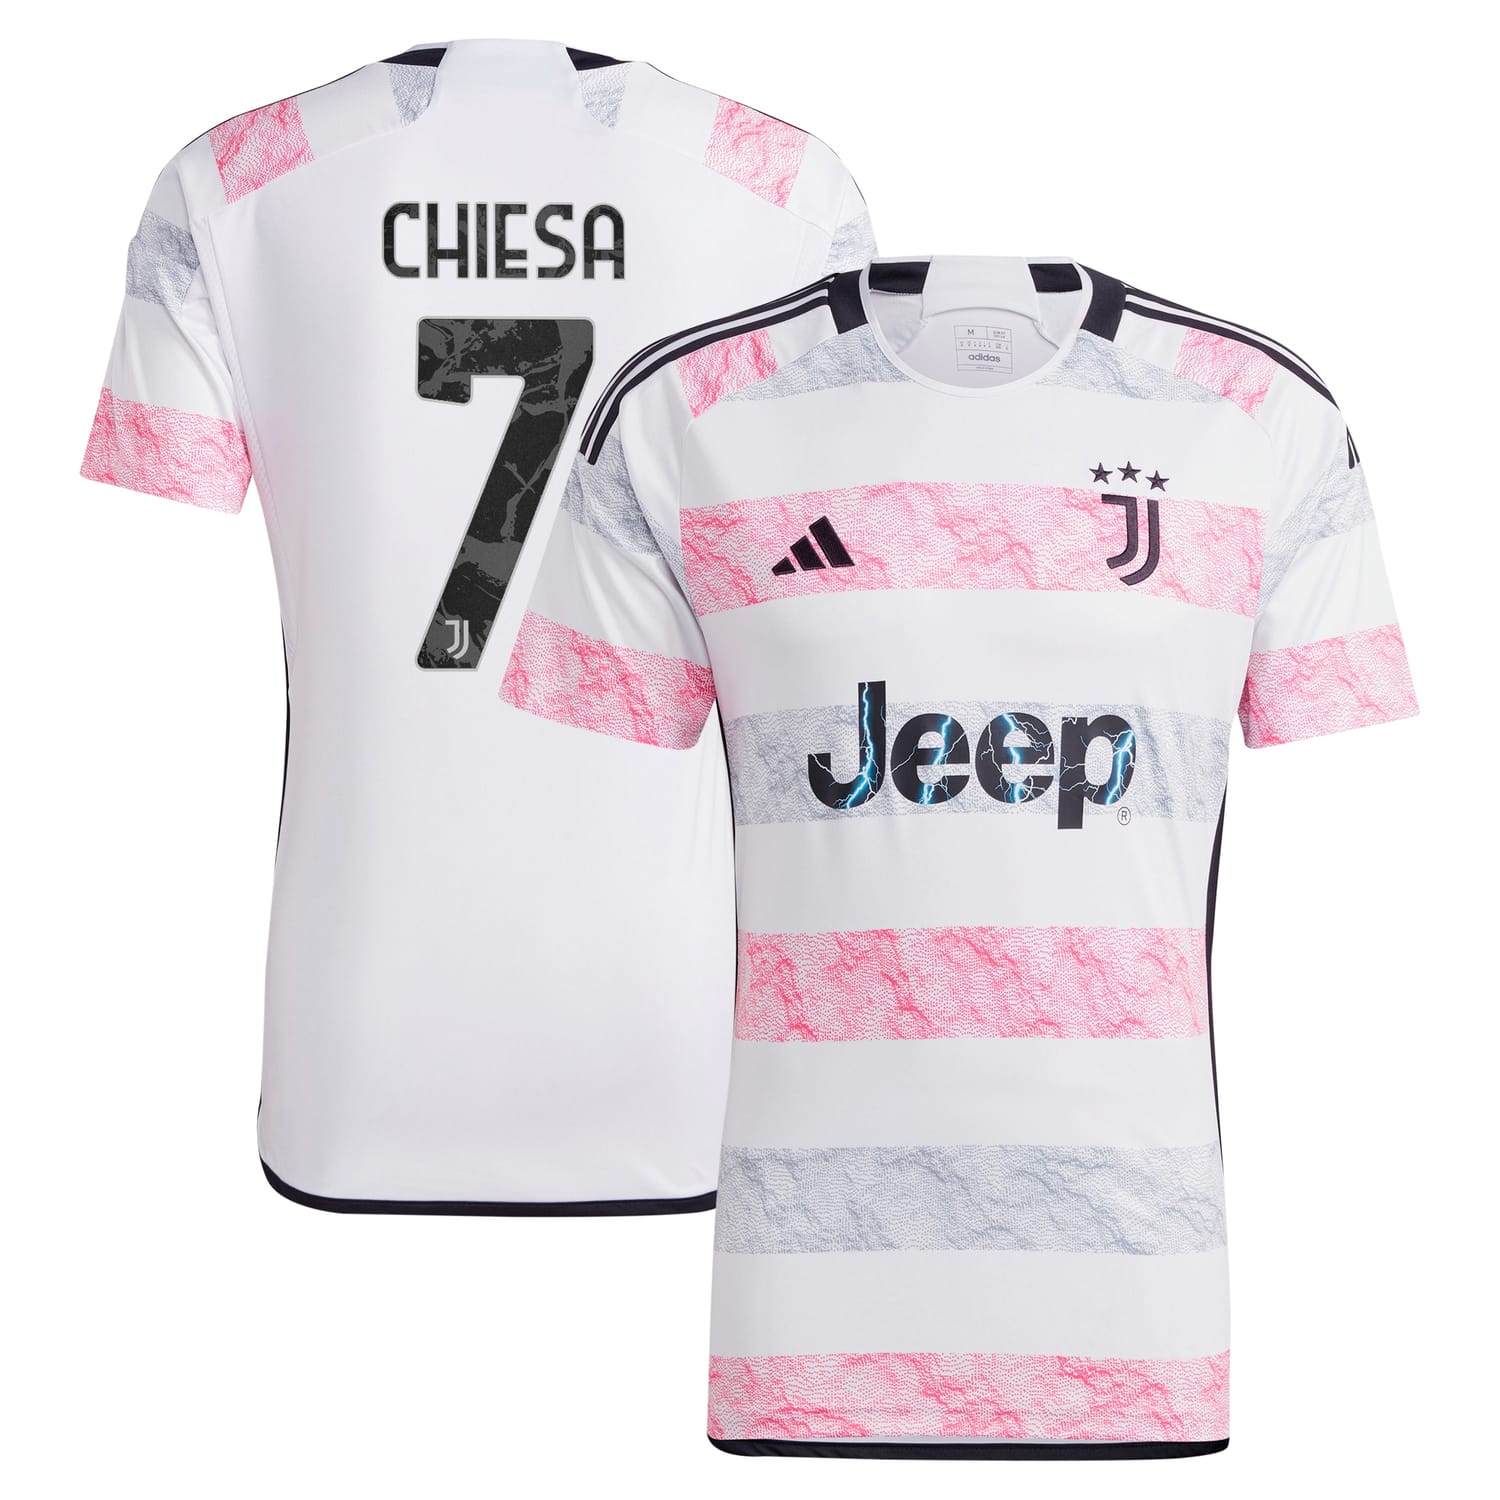 Serie A Juventus Away Jersey Shirt White 2023-24 player Federico Chiesa printing for Men